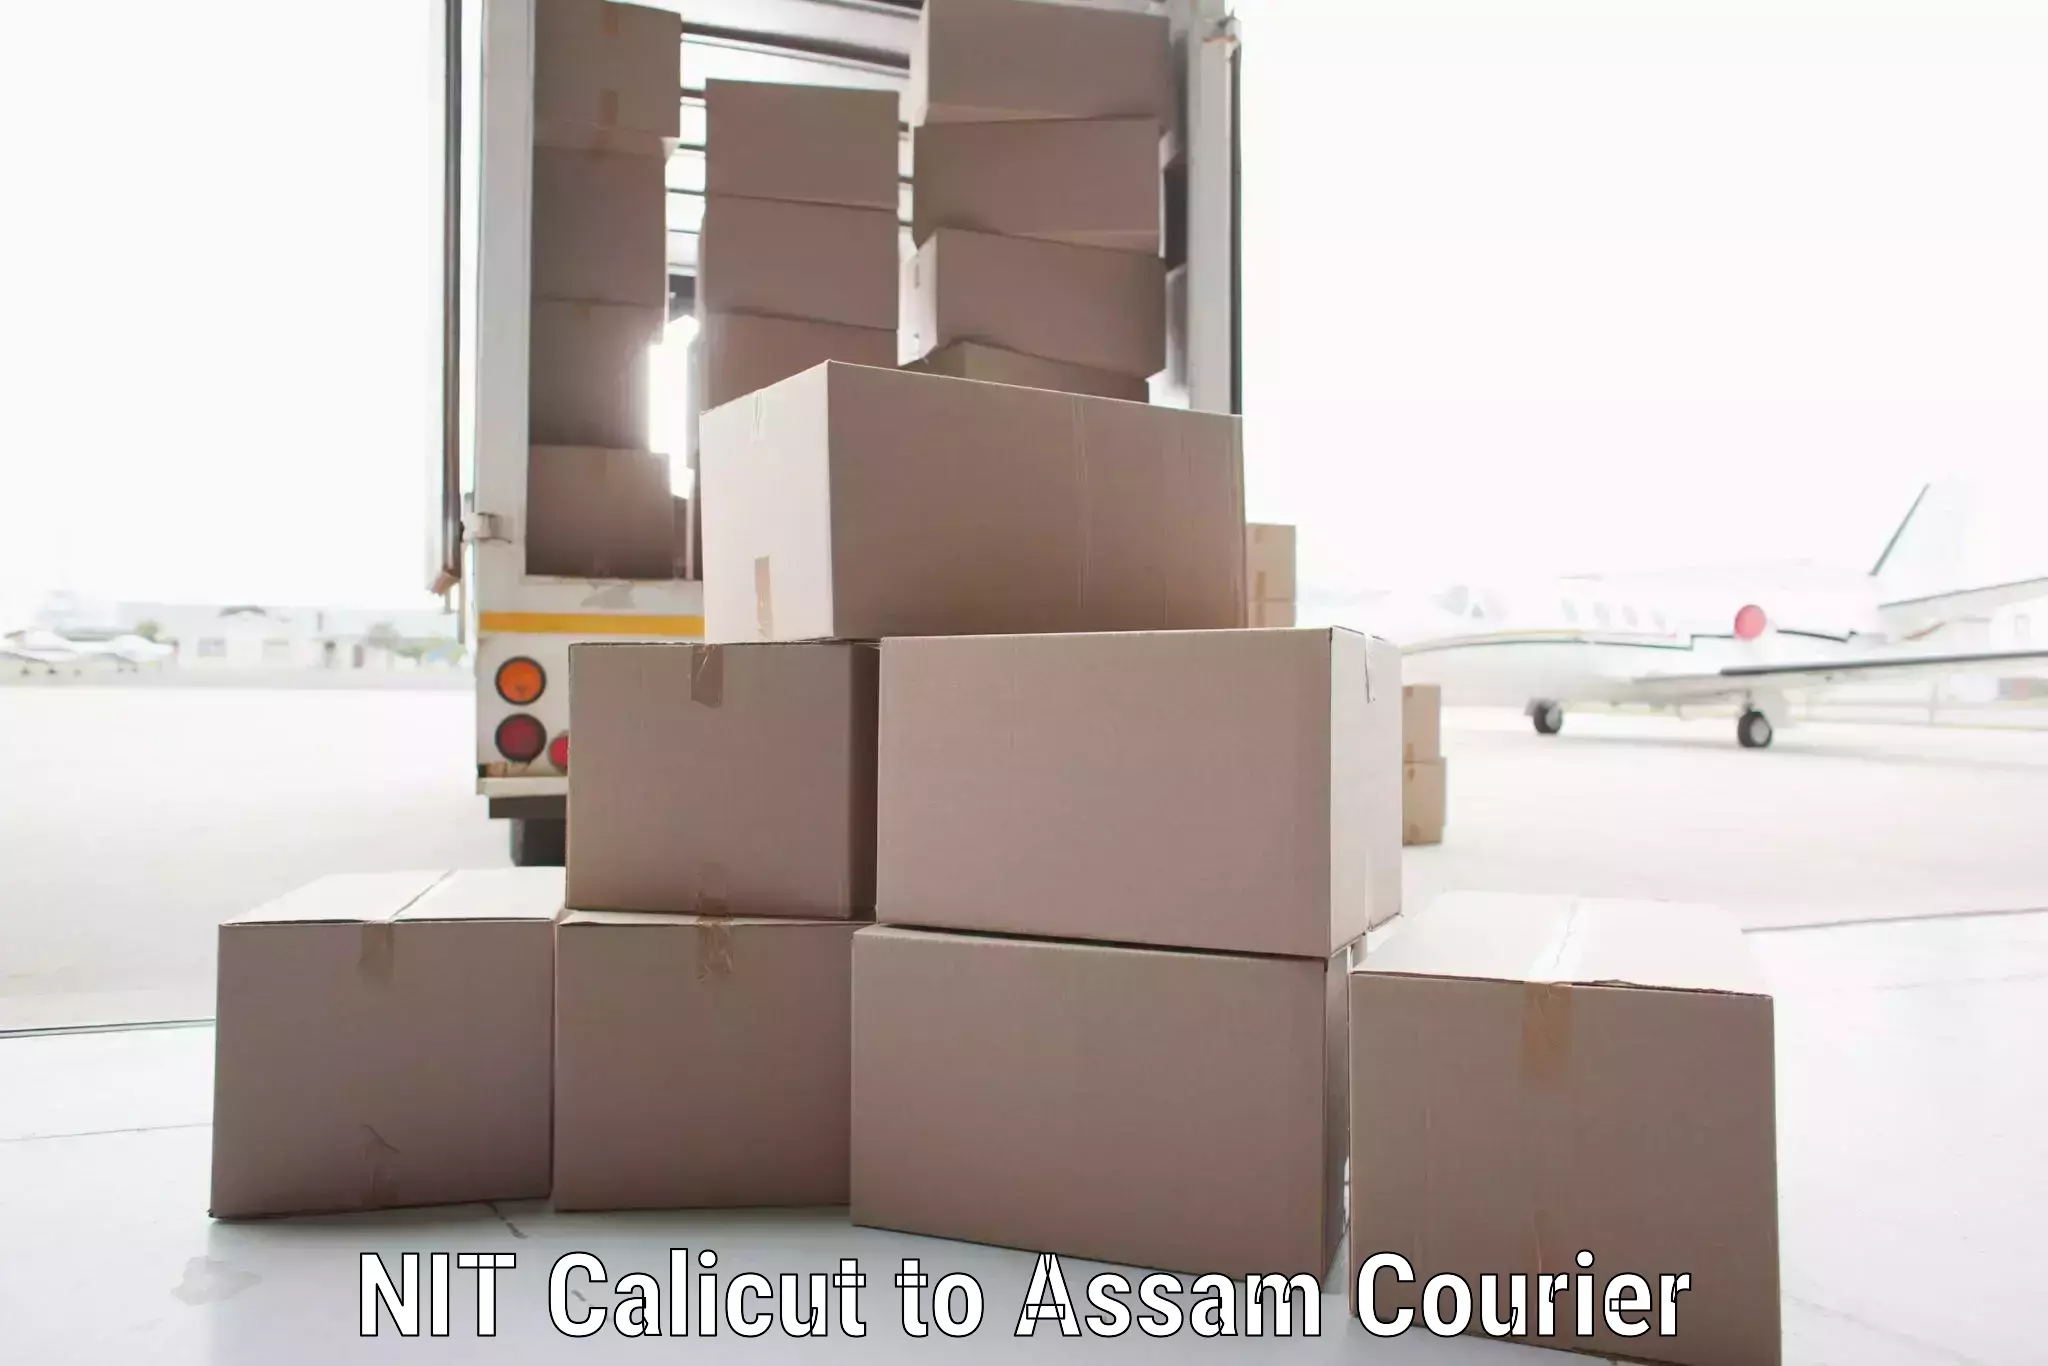 Cash on delivery service NIT Calicut to Barpeta